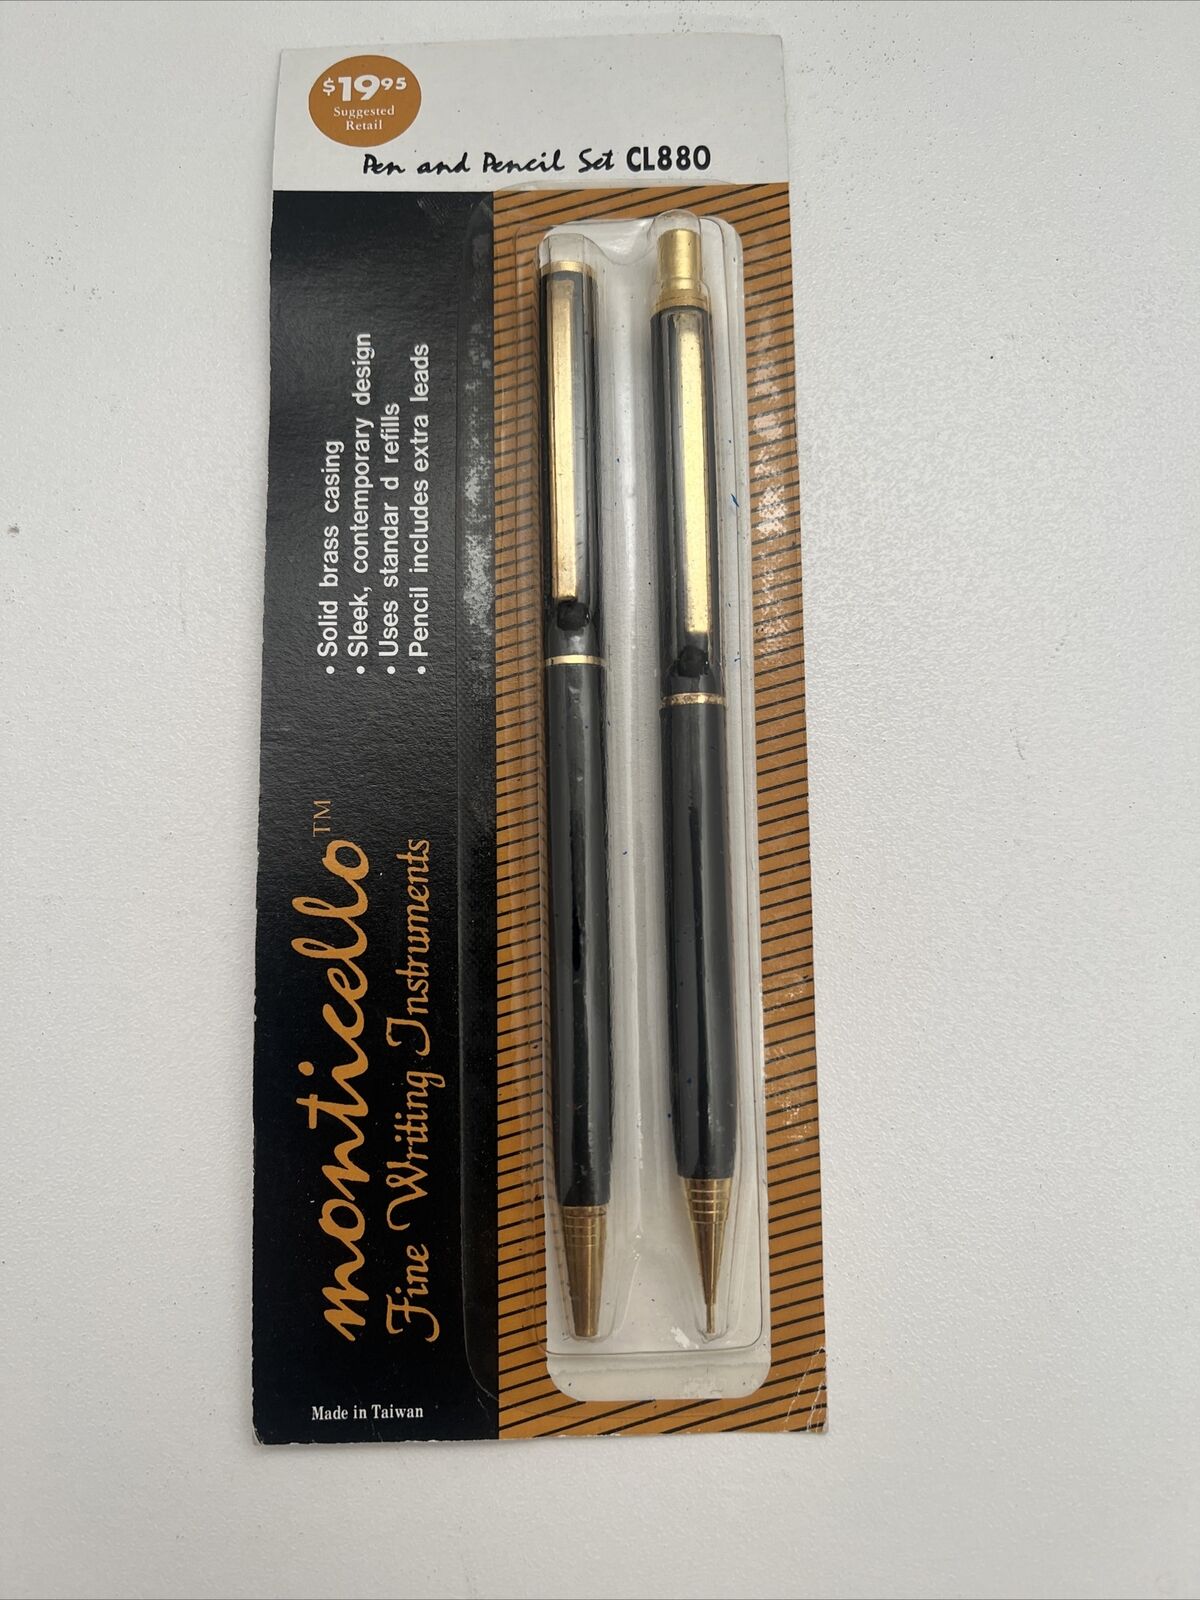 Vintage Monticello Pen and Pencil Set CL880, Brass Casing, New Unopened 1970’s